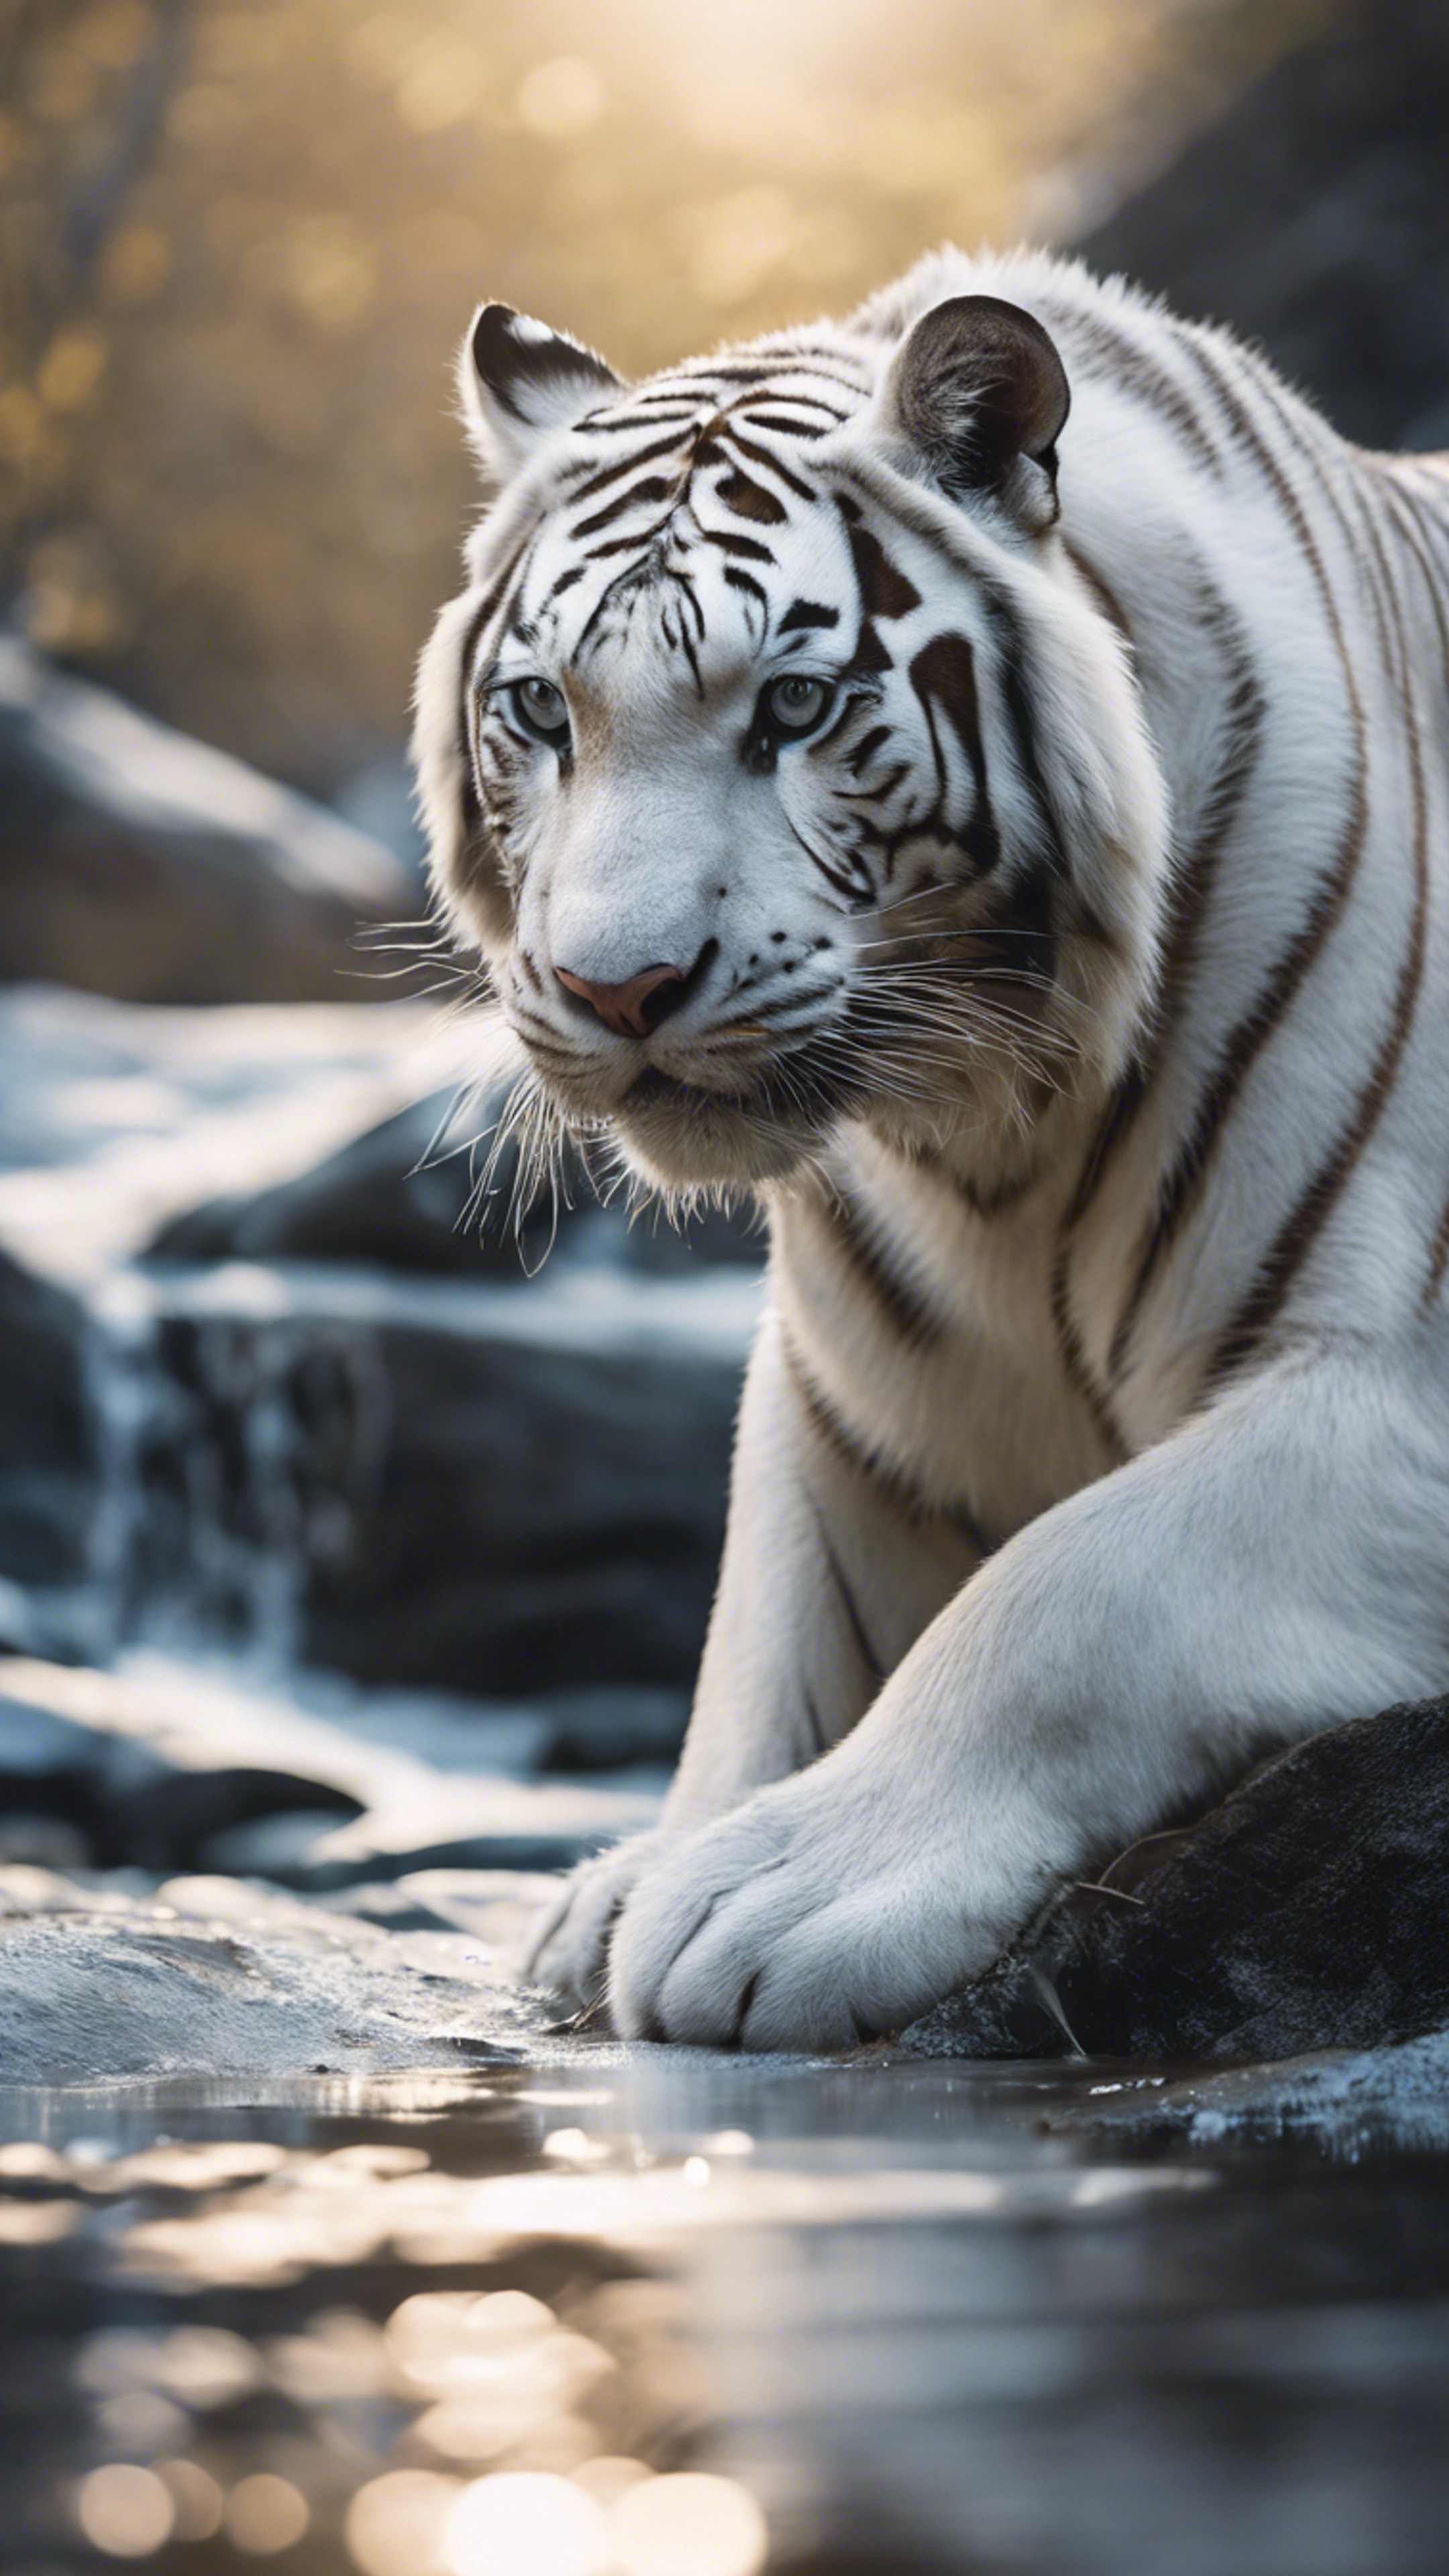 White Bengal tiger crouching near a cold mountain stream, ready to pounce Tapetai[60014ca7a56b4b479206]